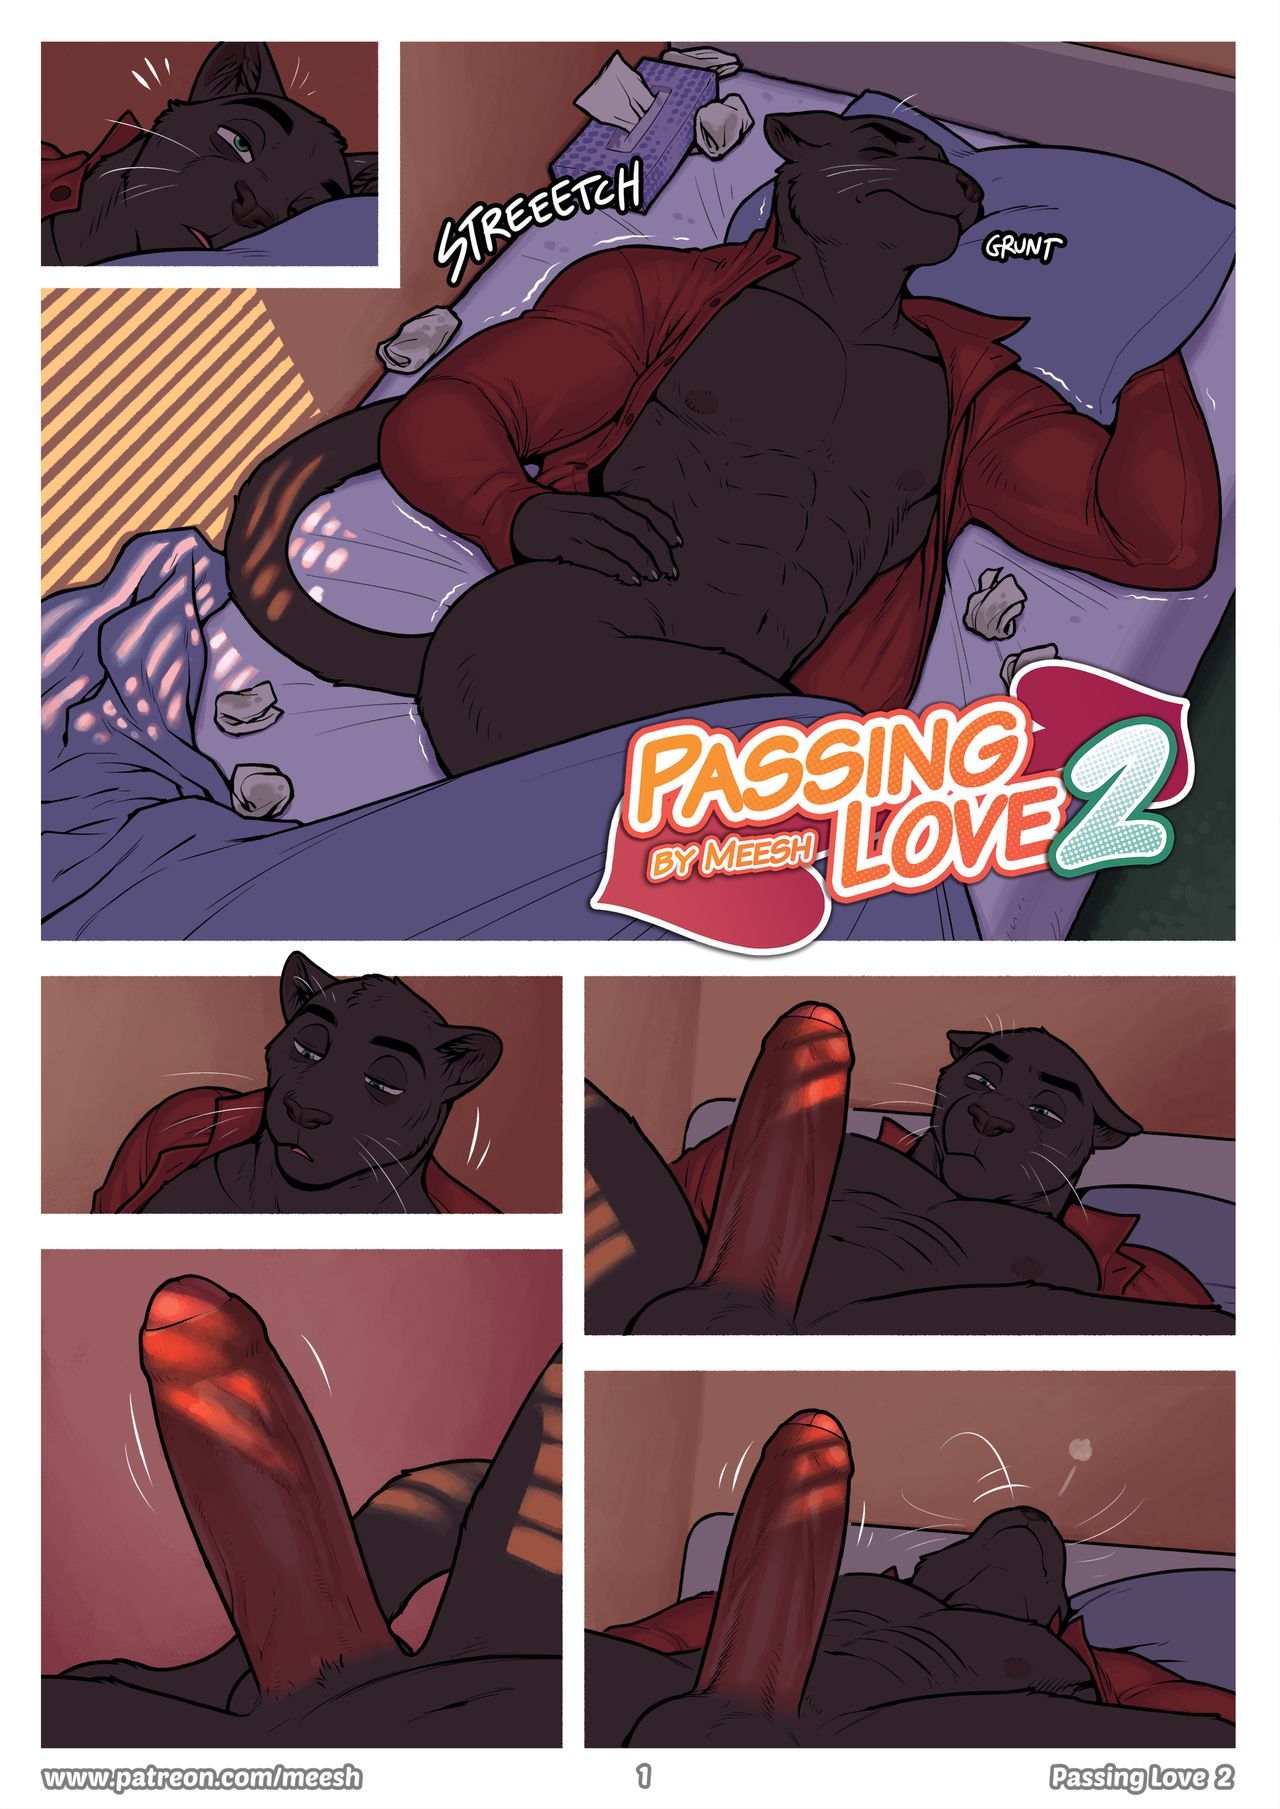 [Meesh] Passing Love 2 HD (Ongoing) 1